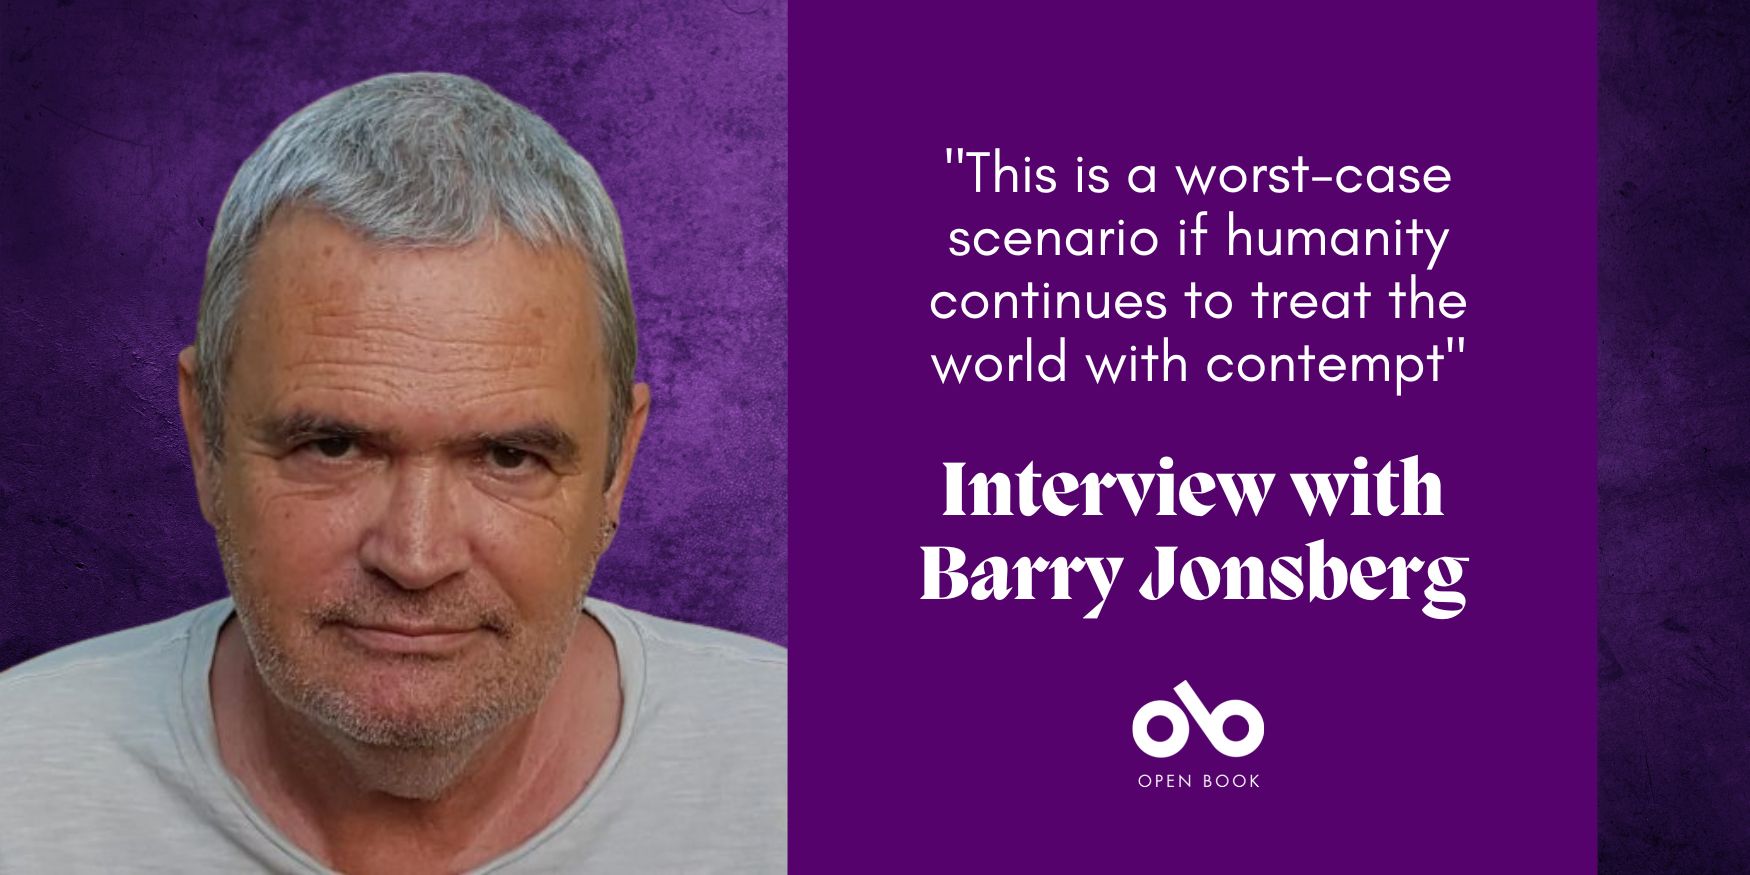 purple graphic with photo of author Barry Jonsberg and text "This is a worst-case scenario if humanity continues to treat the world with contempt. Interview with Barry Jonsberg" Open Book logo centred below text